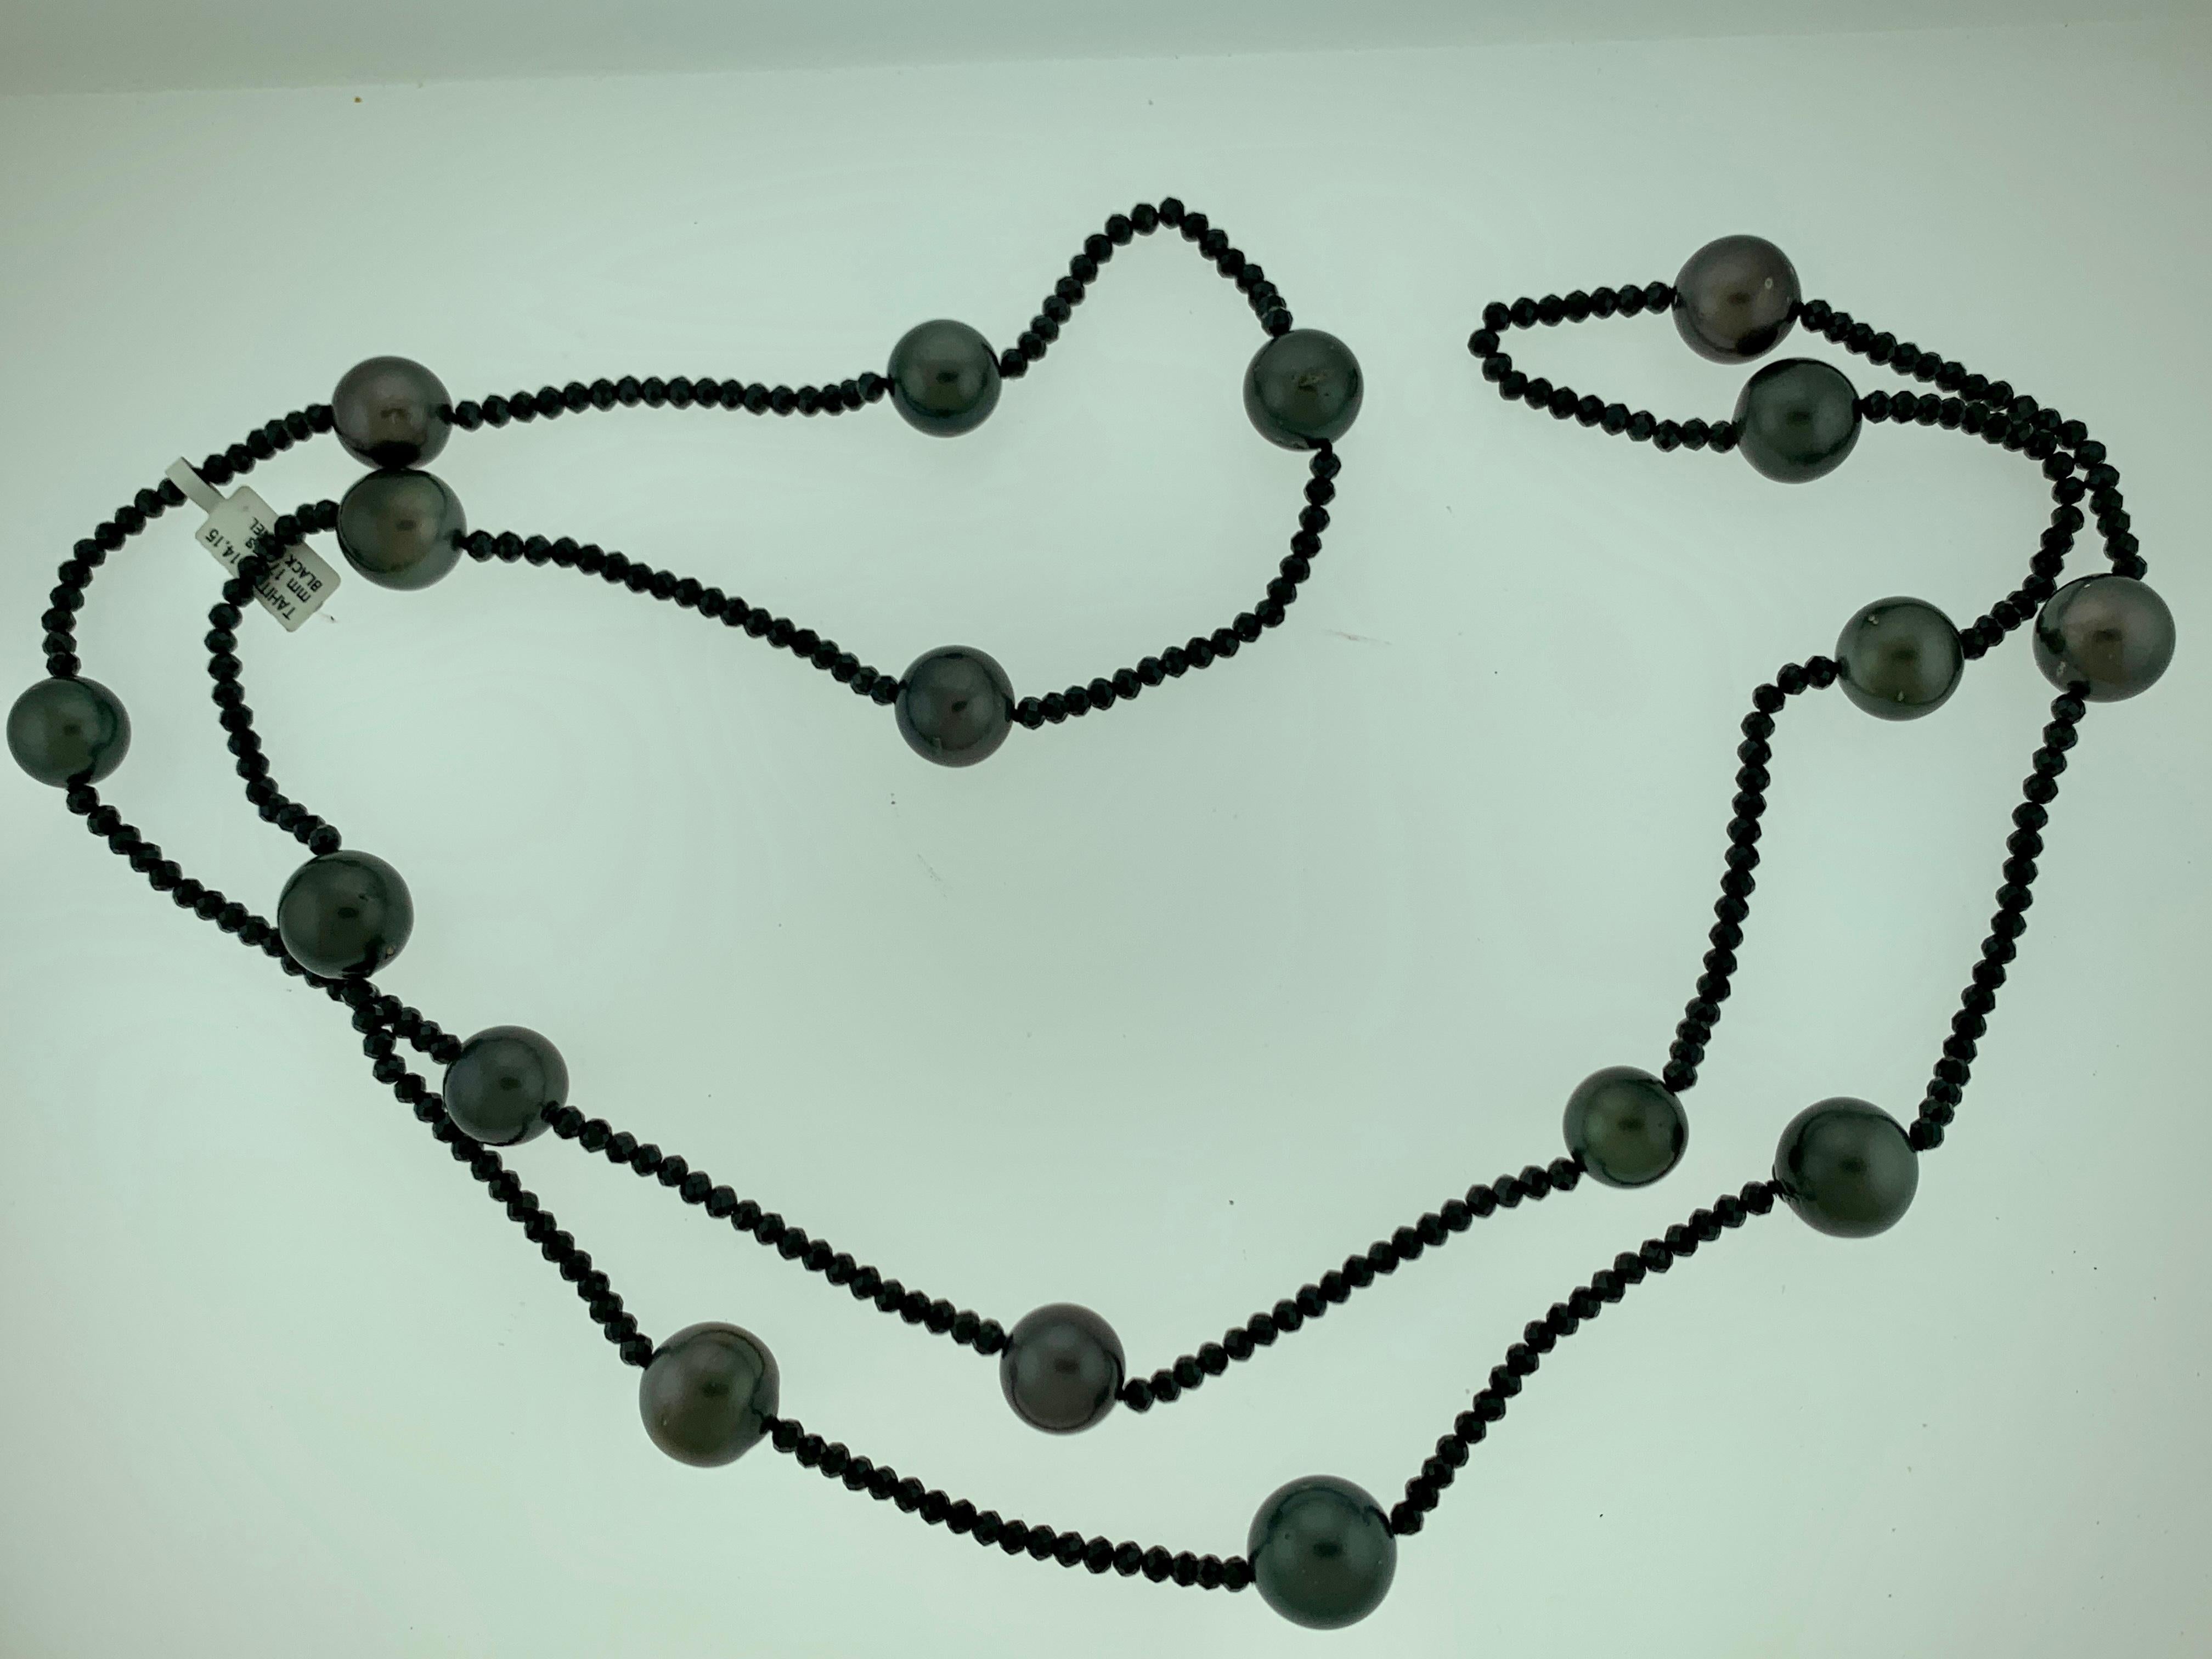 Black Tahitian Pearl Single Strand Necklace with Black Spinel, Opera Length 46